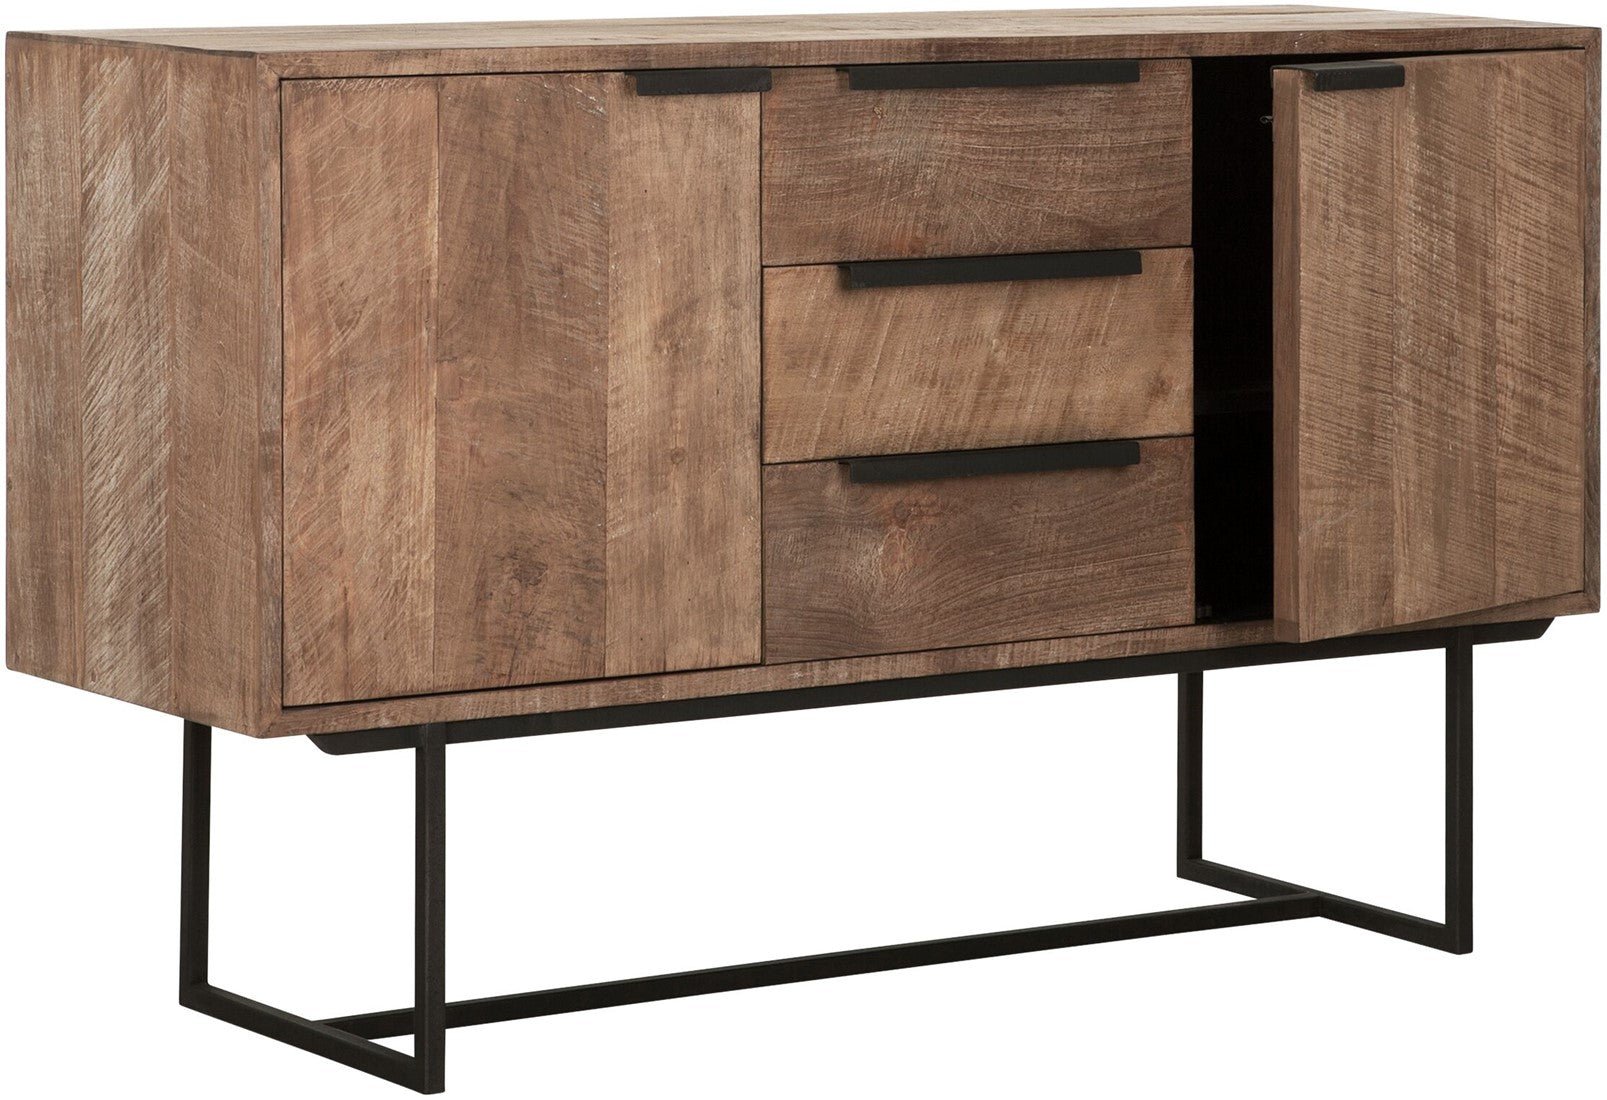 Sideboard Odeon - DTP Home